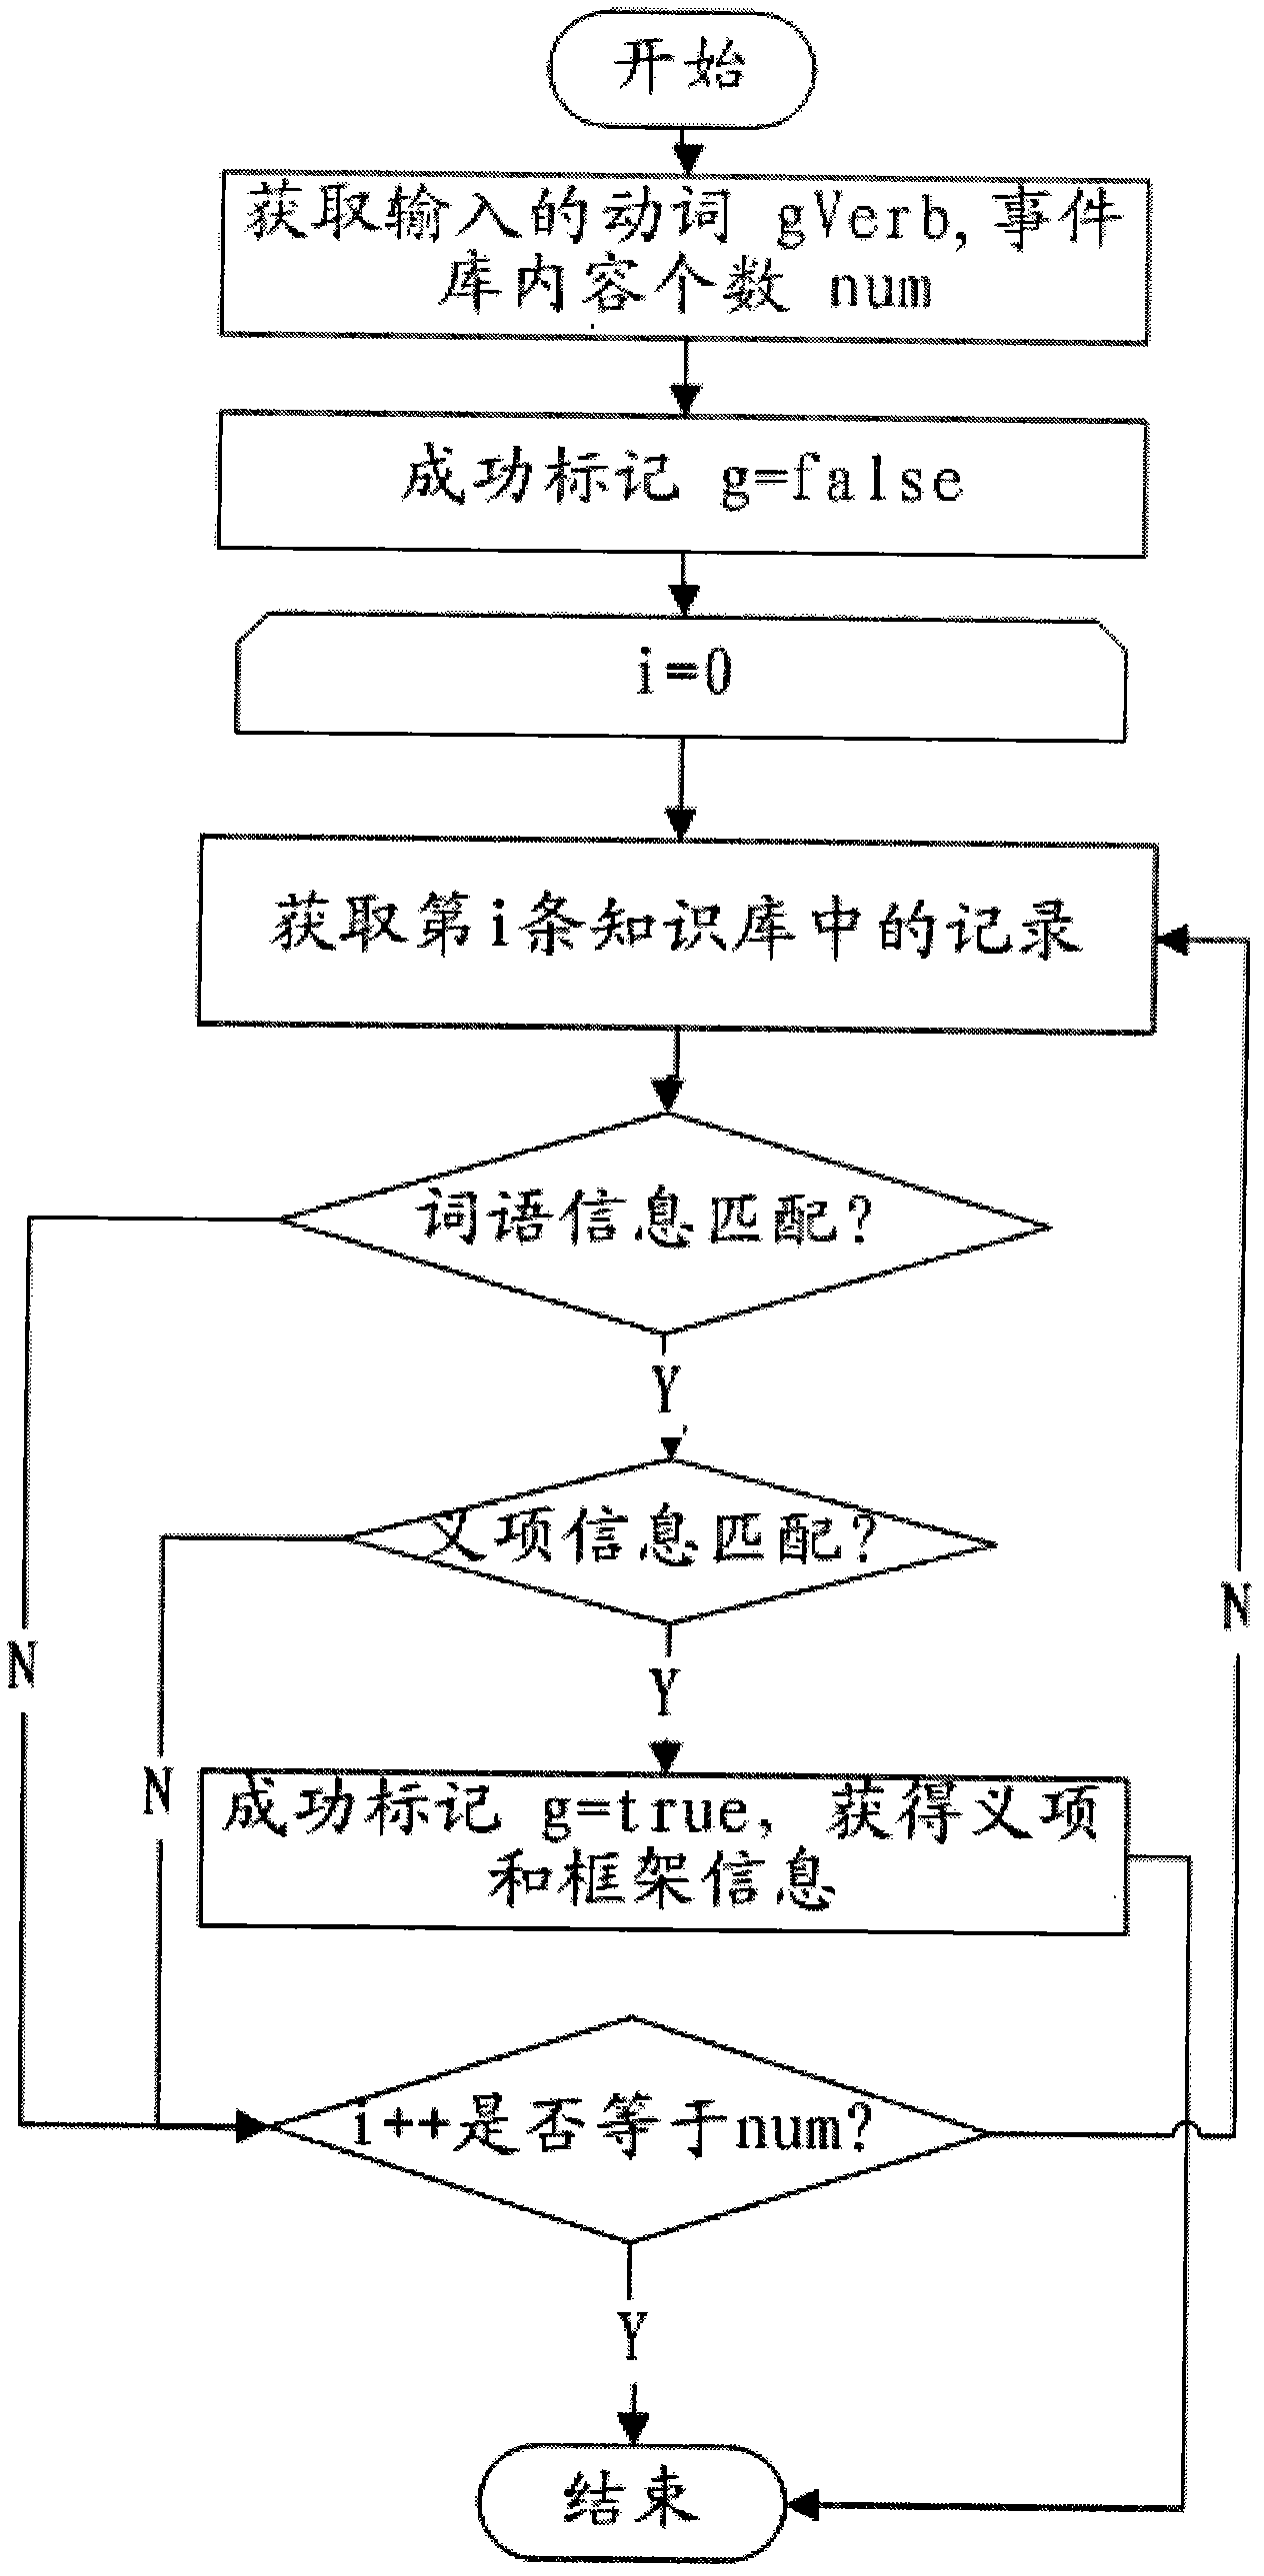 Method for extracting event sentence pattern from Chinese sentence